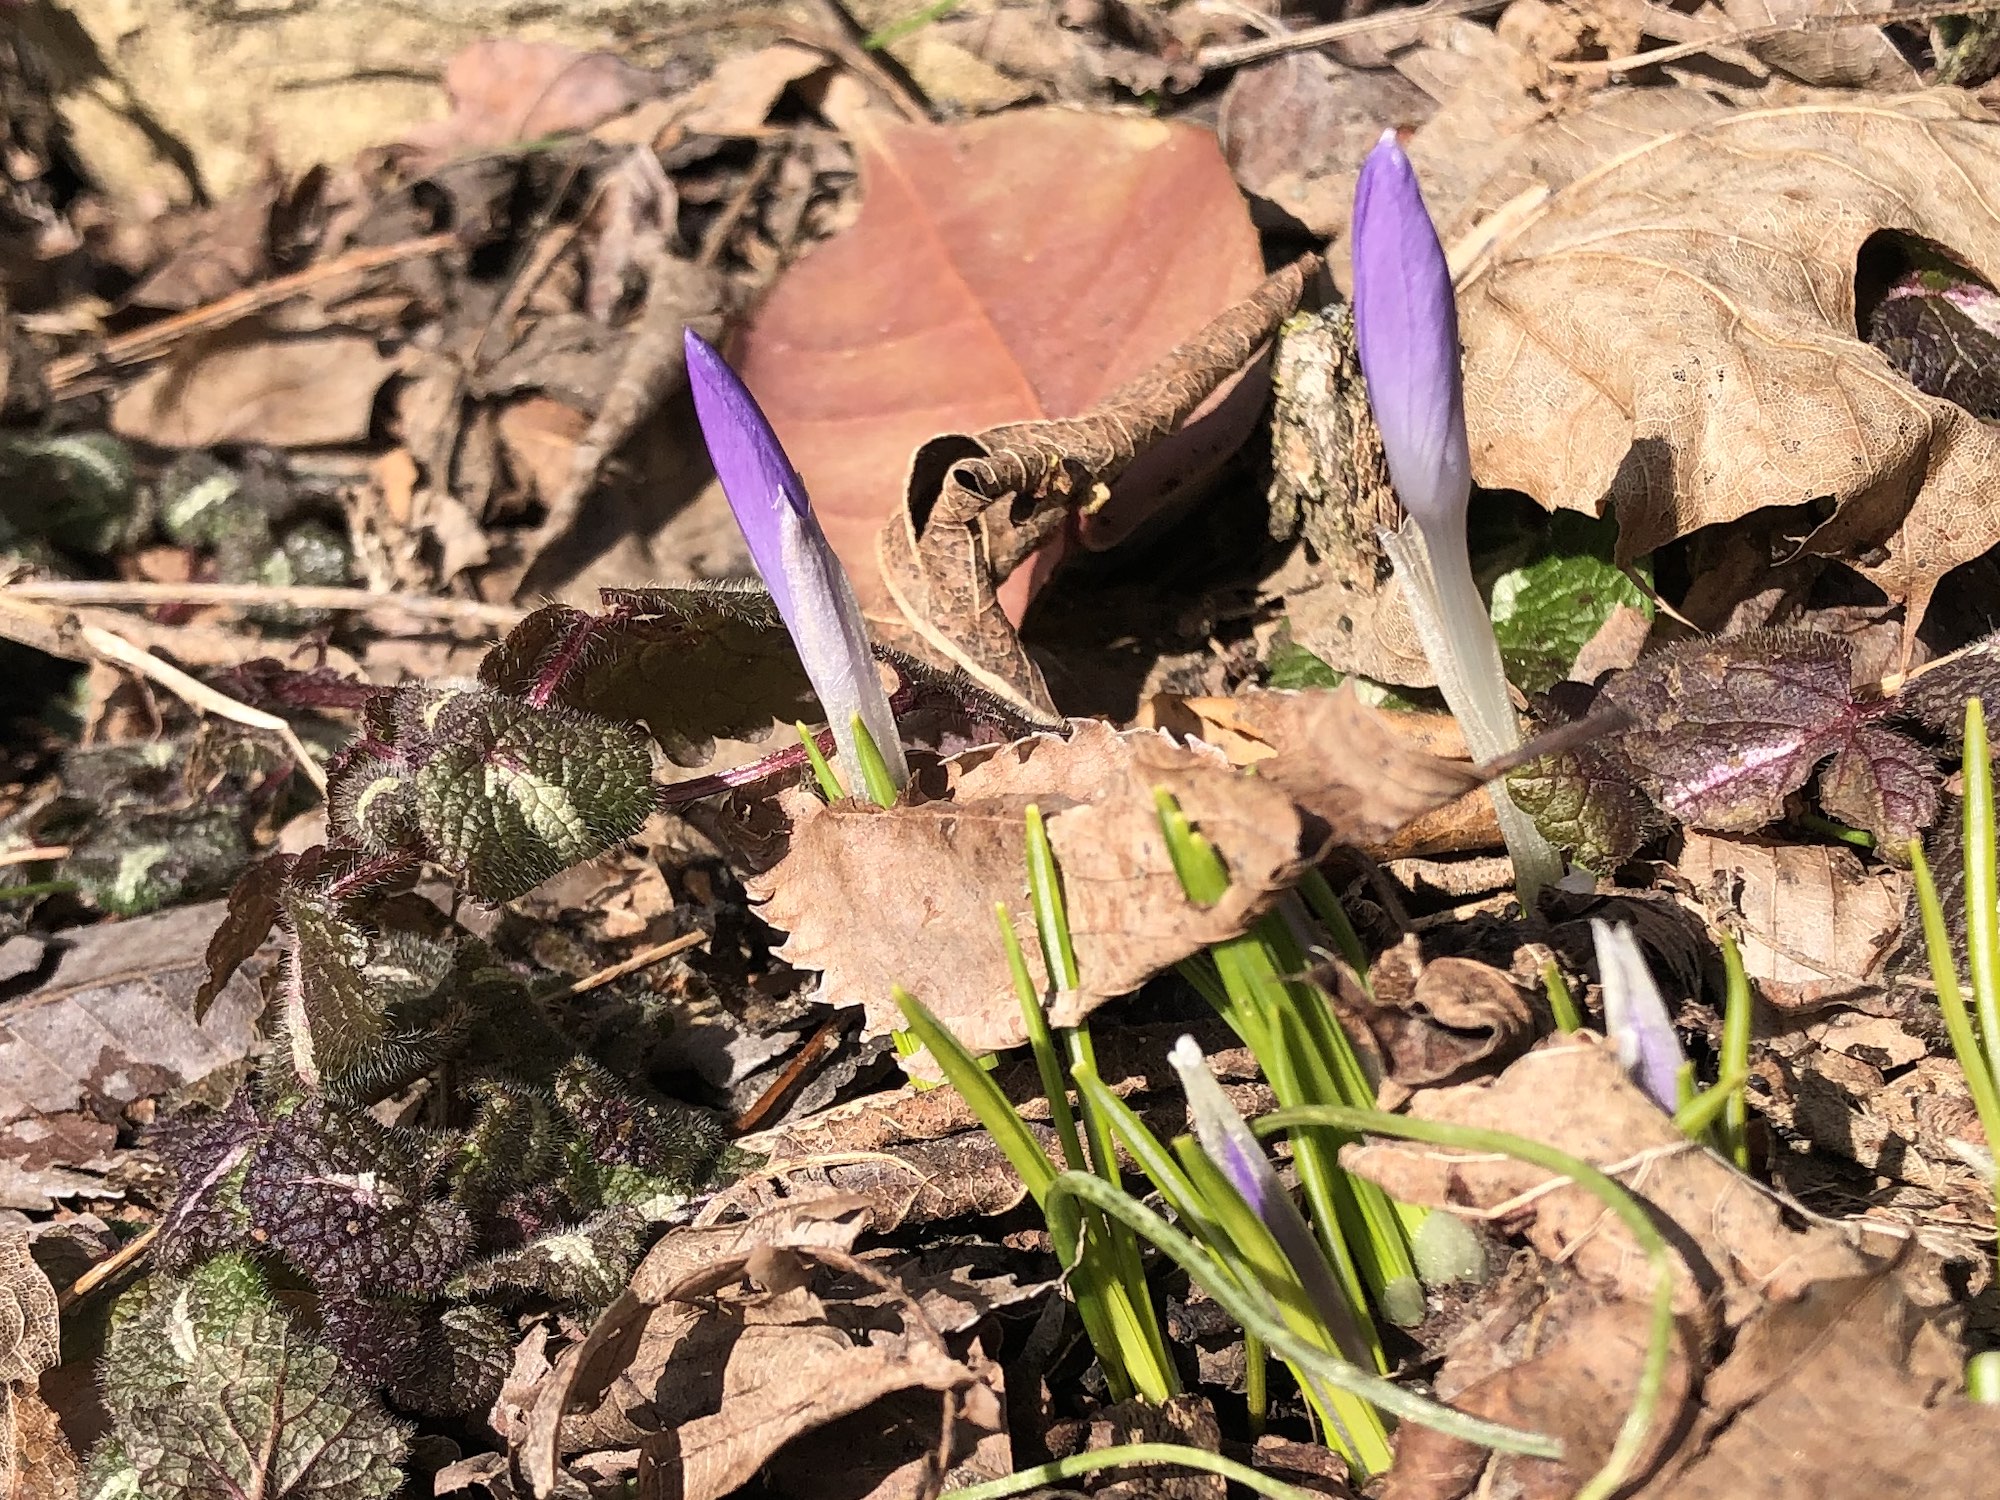 Crocus by Agawa Path in Madison, Wisconsin on March 7, 2023.